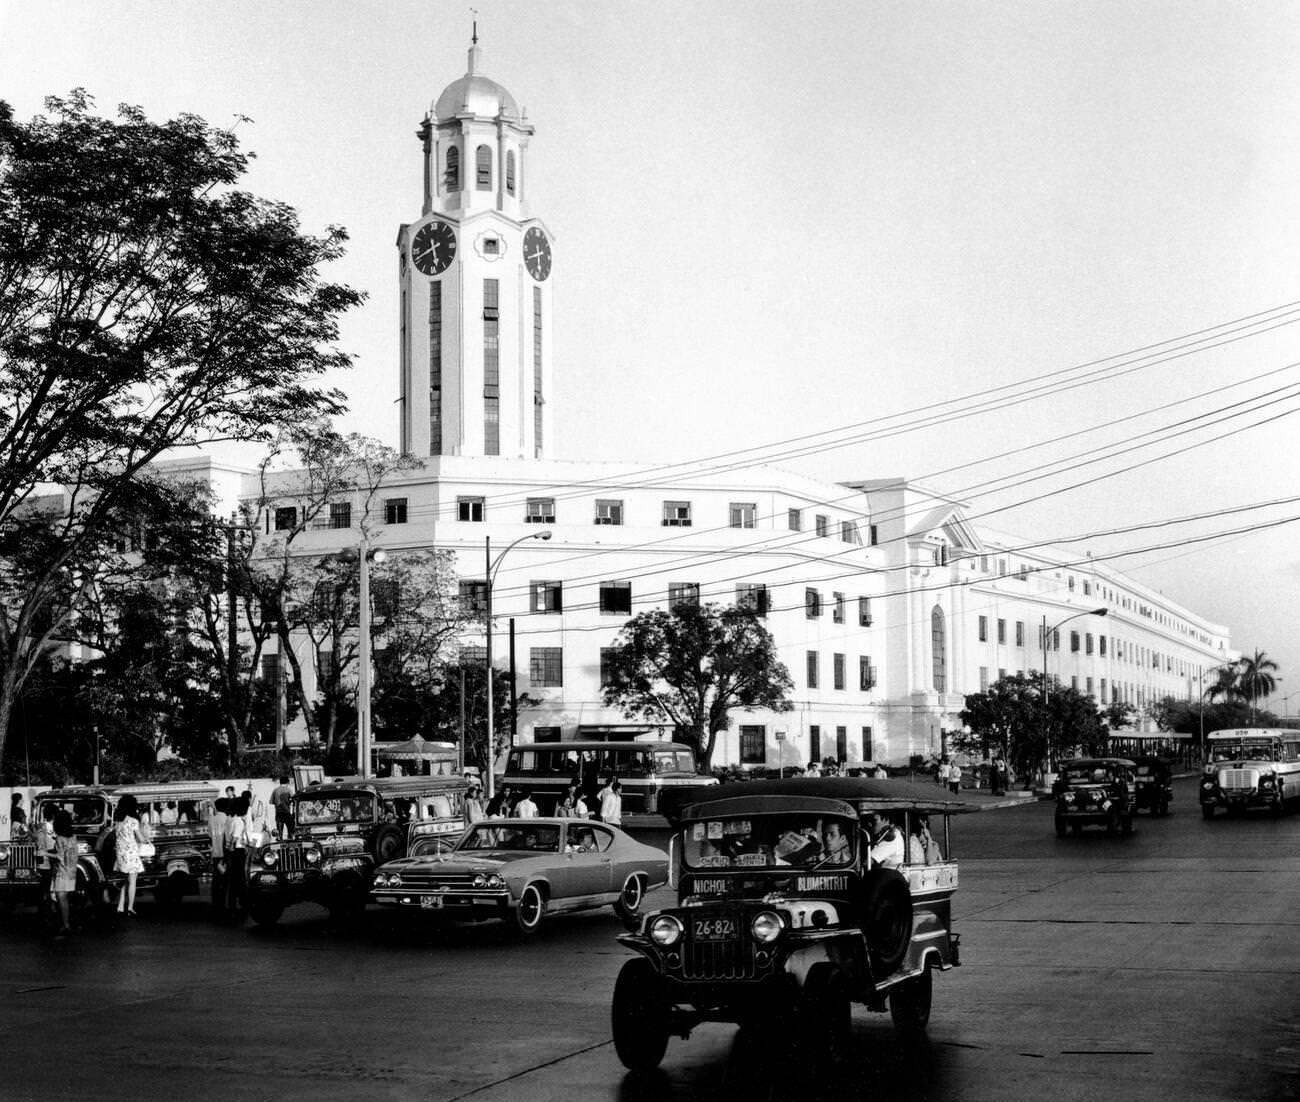 Manila's city hall on Luzon, Philippines, with jeepneys on Taft Boulevard in the foreground, 1972.